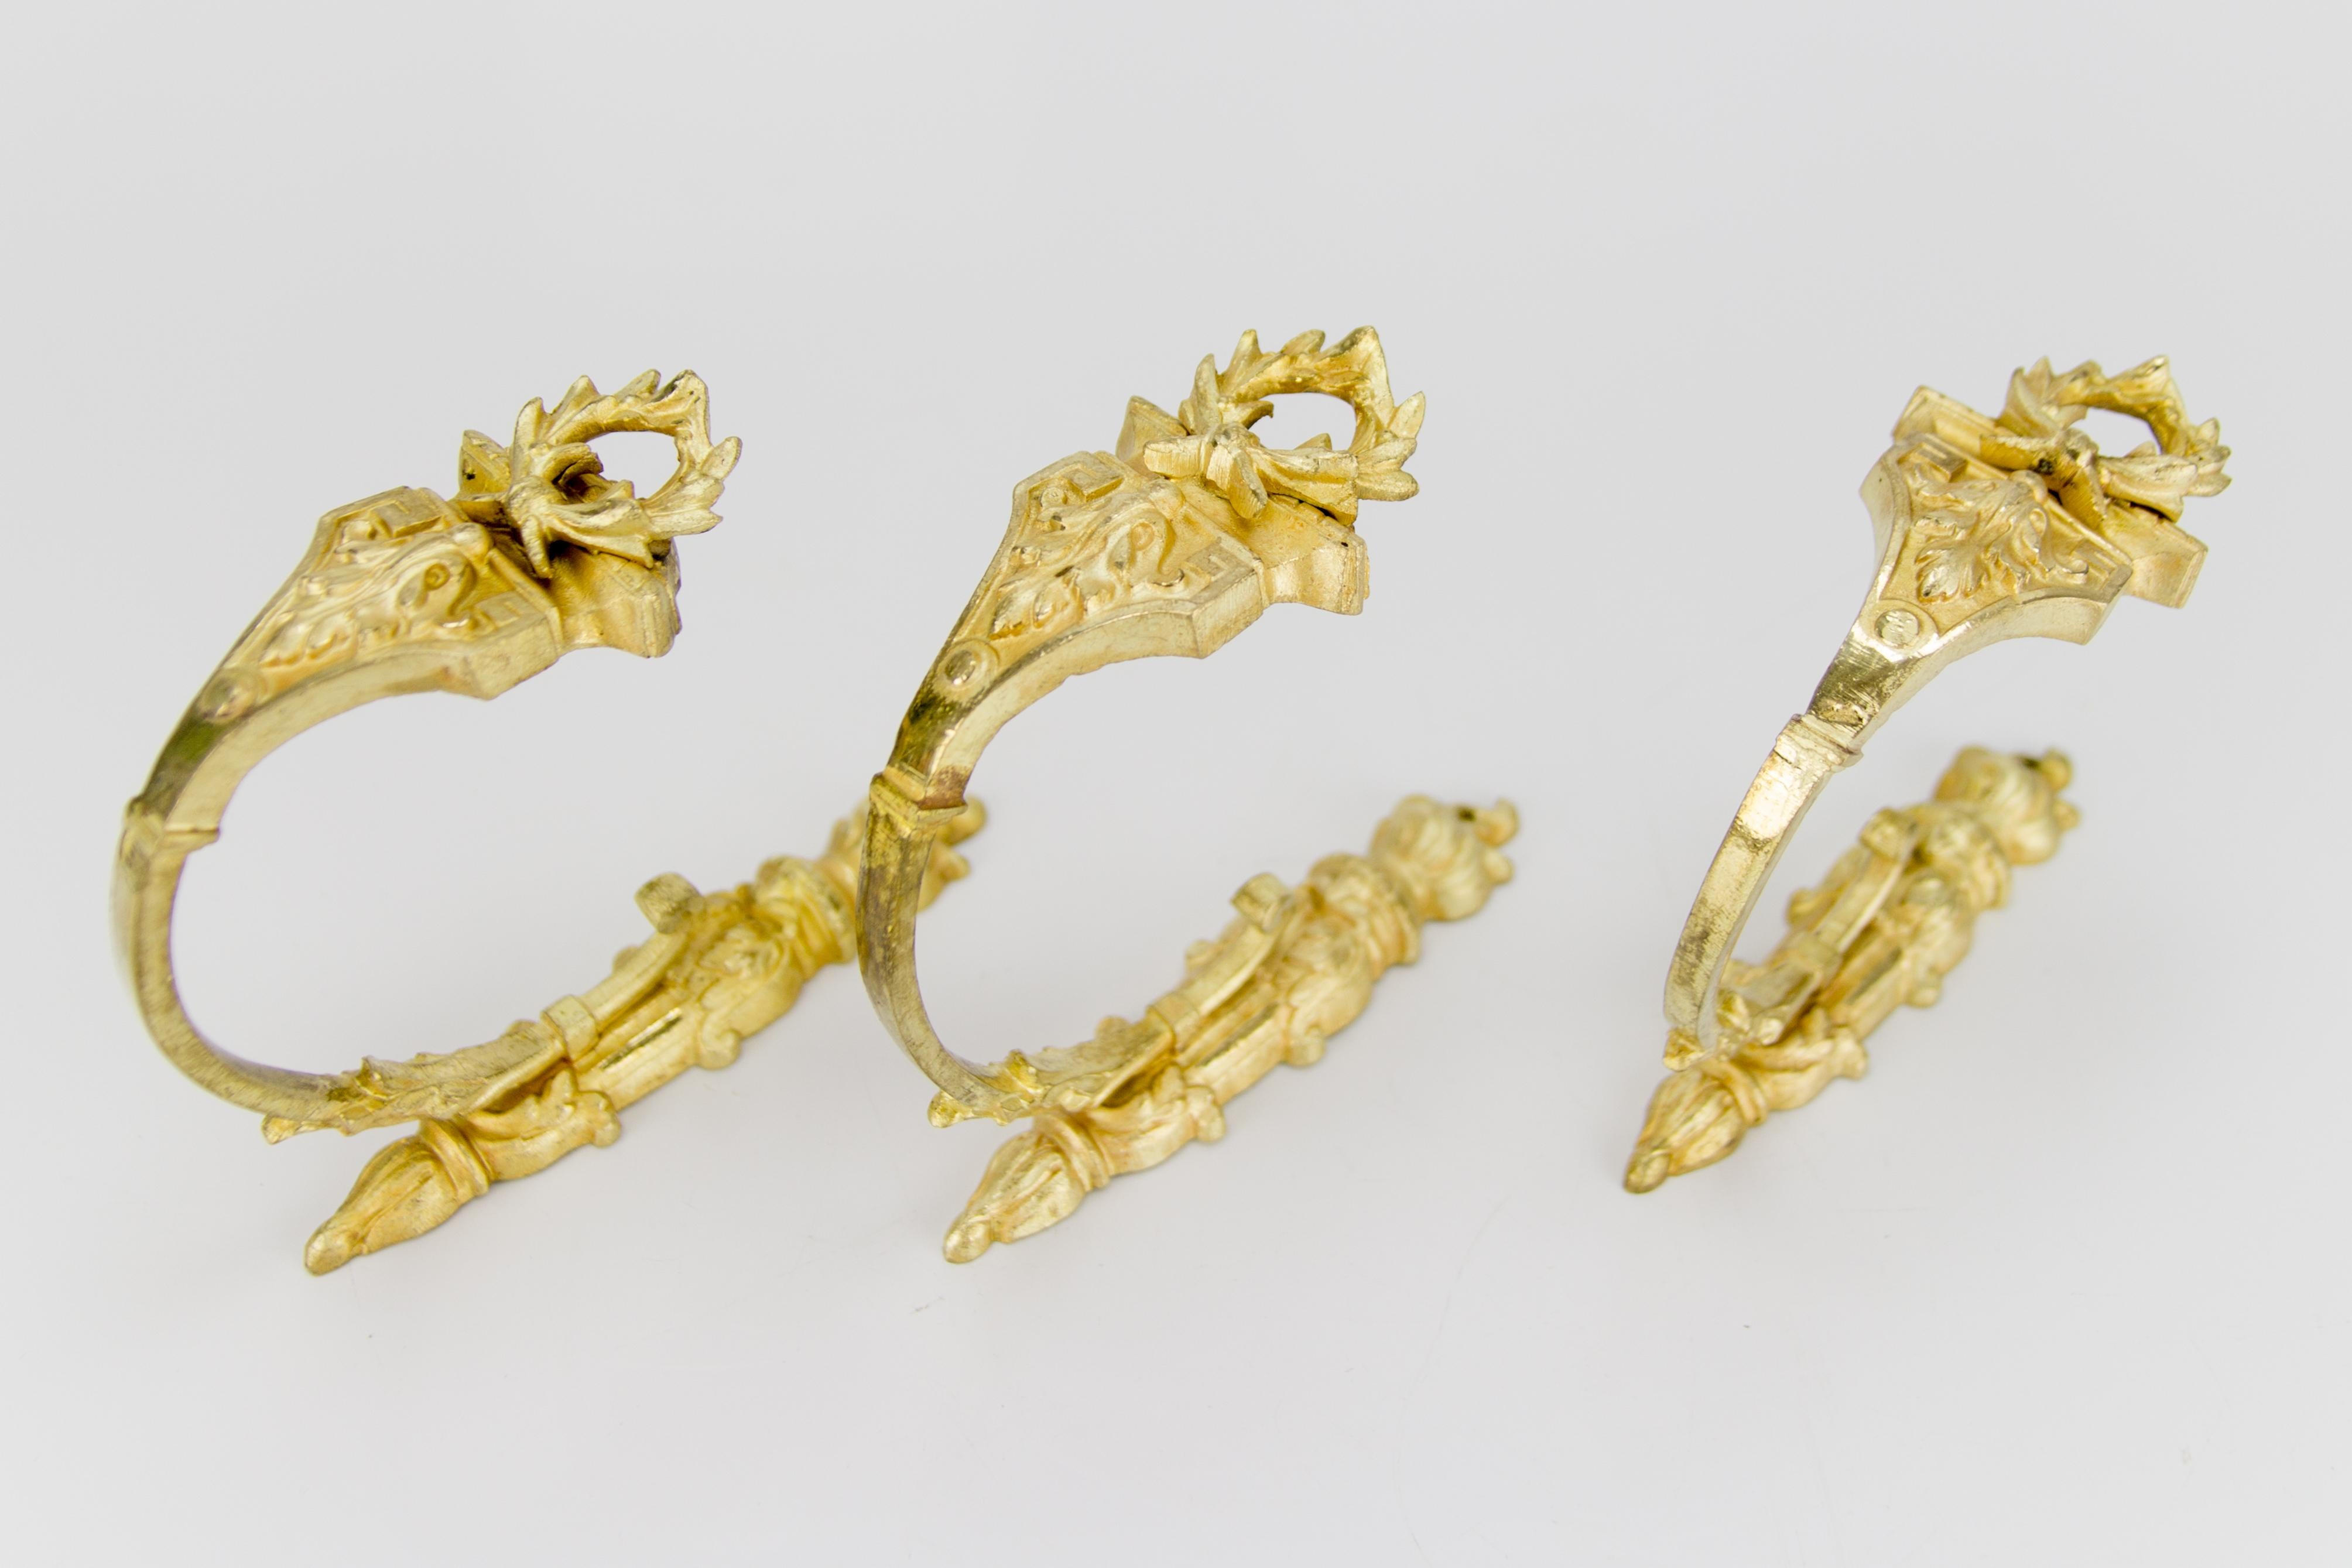 19th Century French Gilt Bronze Curtain Tiebacks or Curtain Holders Signed A.D., Set of 3 For Sale